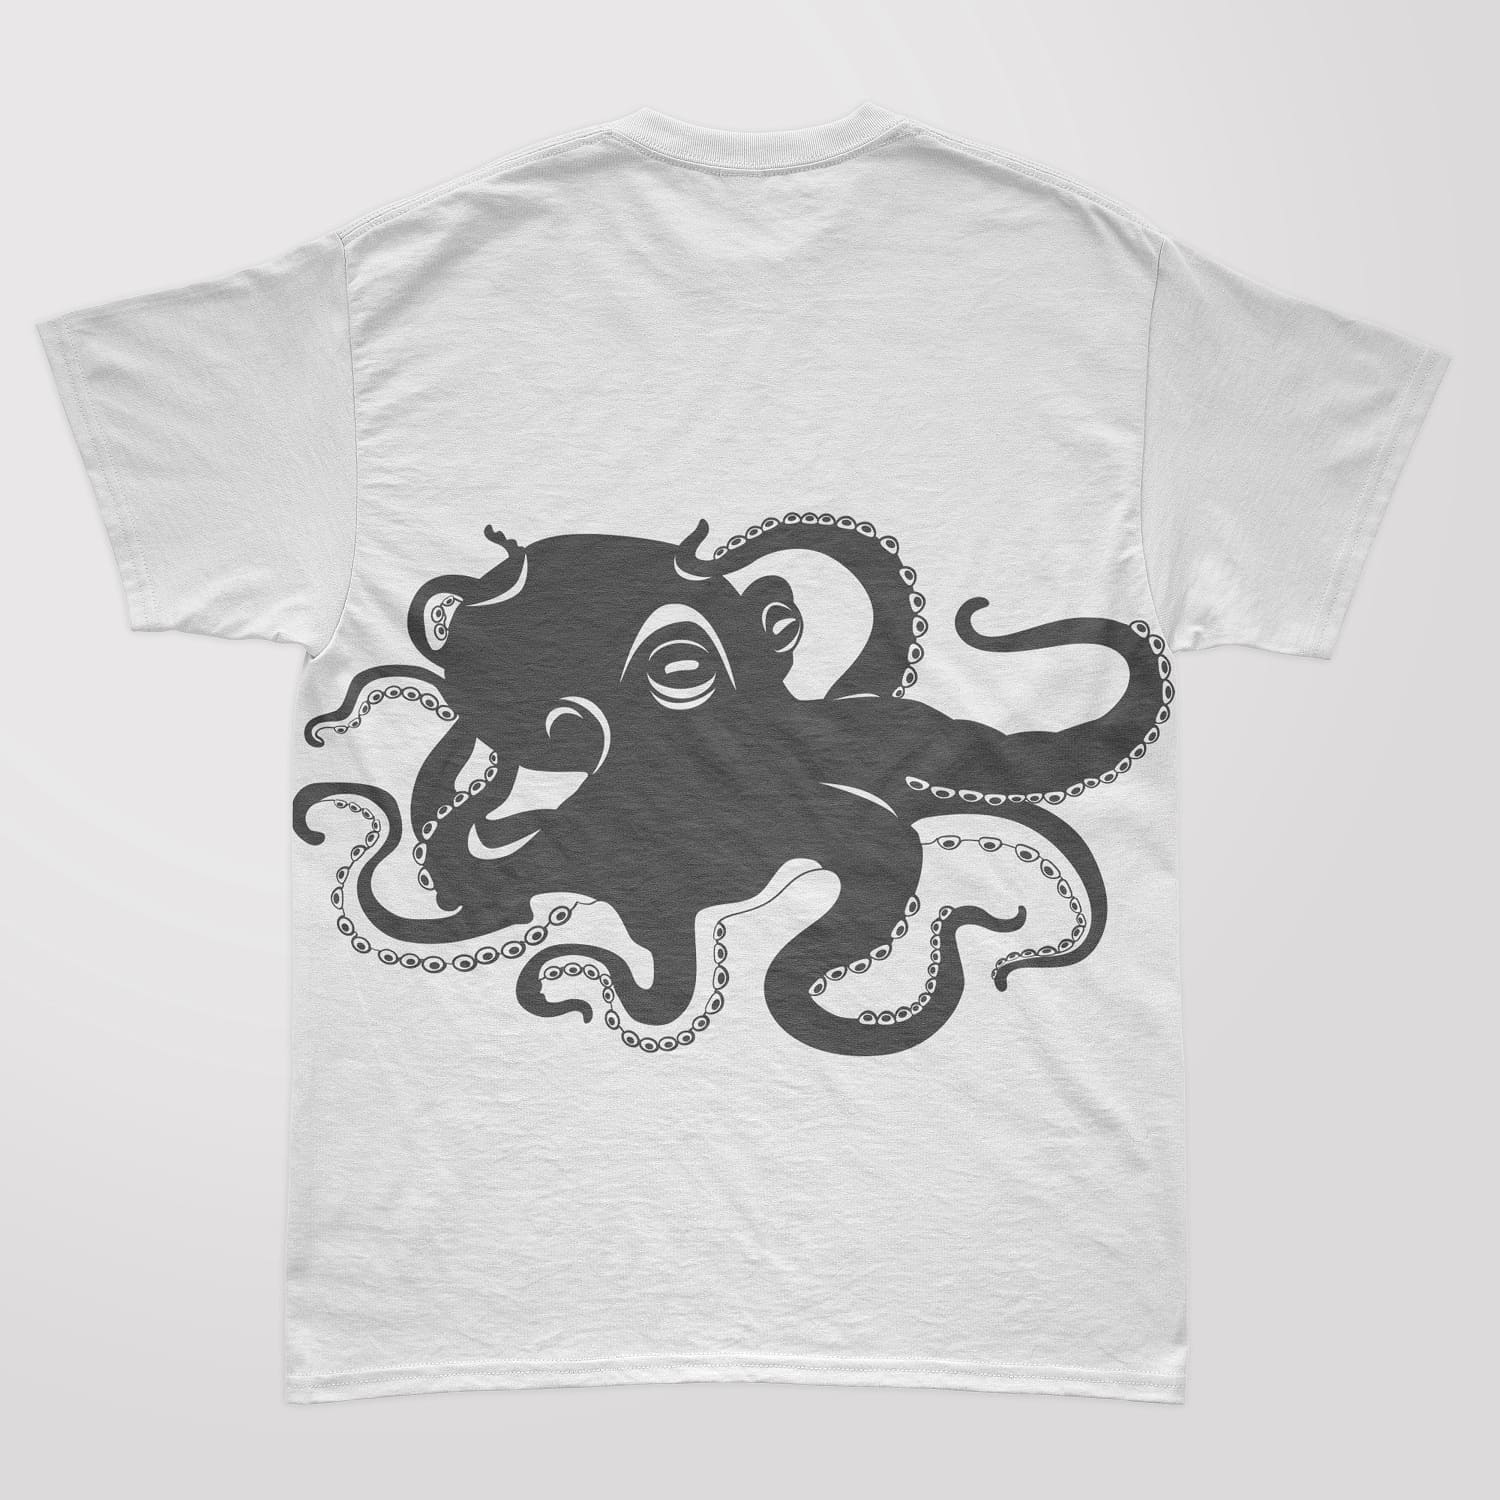 A white t-shirt with a gray silhouette print of a wide-spread octopus.